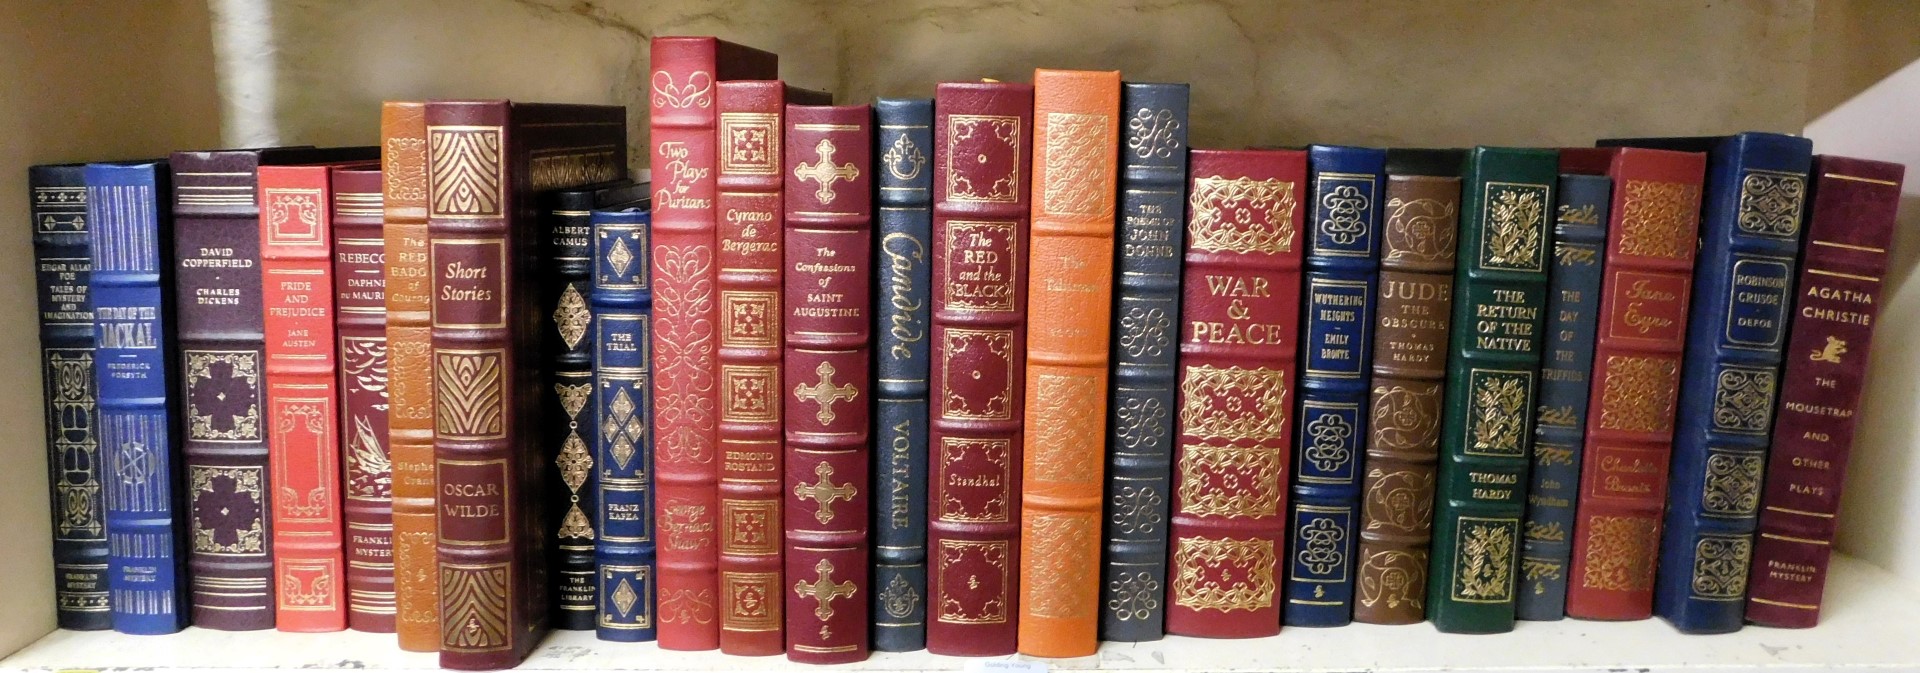 Franklin Library and Easton Press books, including Tolstoy, War and Peace, Stendhal, The Red and the